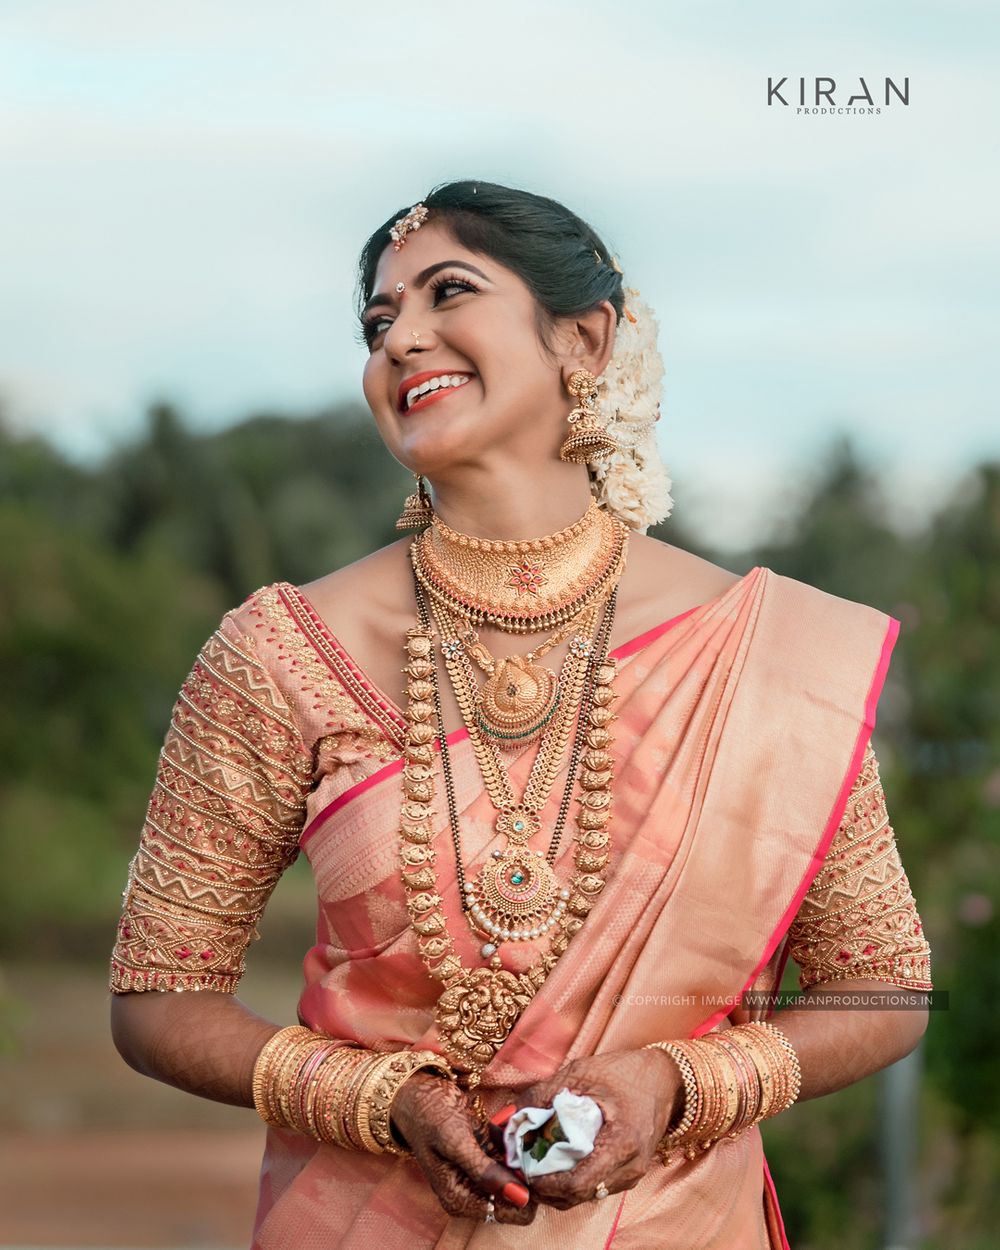 Photo of South Indian bride dressed in pink saree on her wedding day